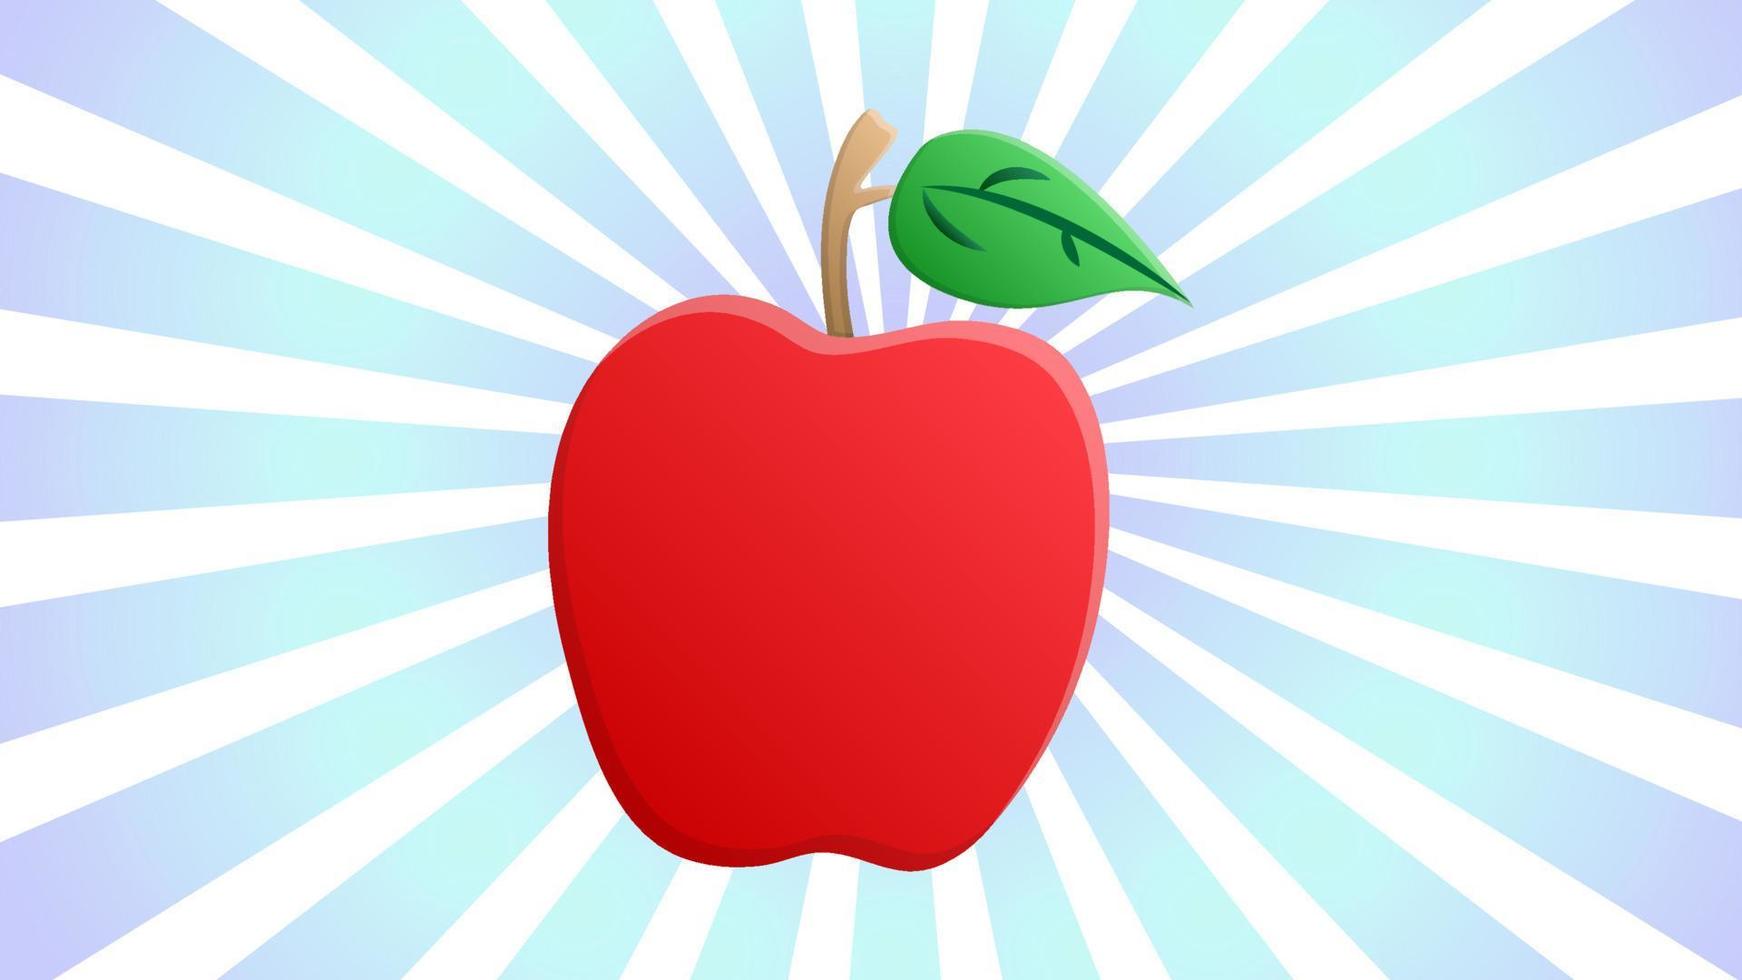 apple of red color on a white and blue retro background, vector illustration. fruit for eating. healthy food, diet food, vegan food, raw food diet. apple with green leaf on top